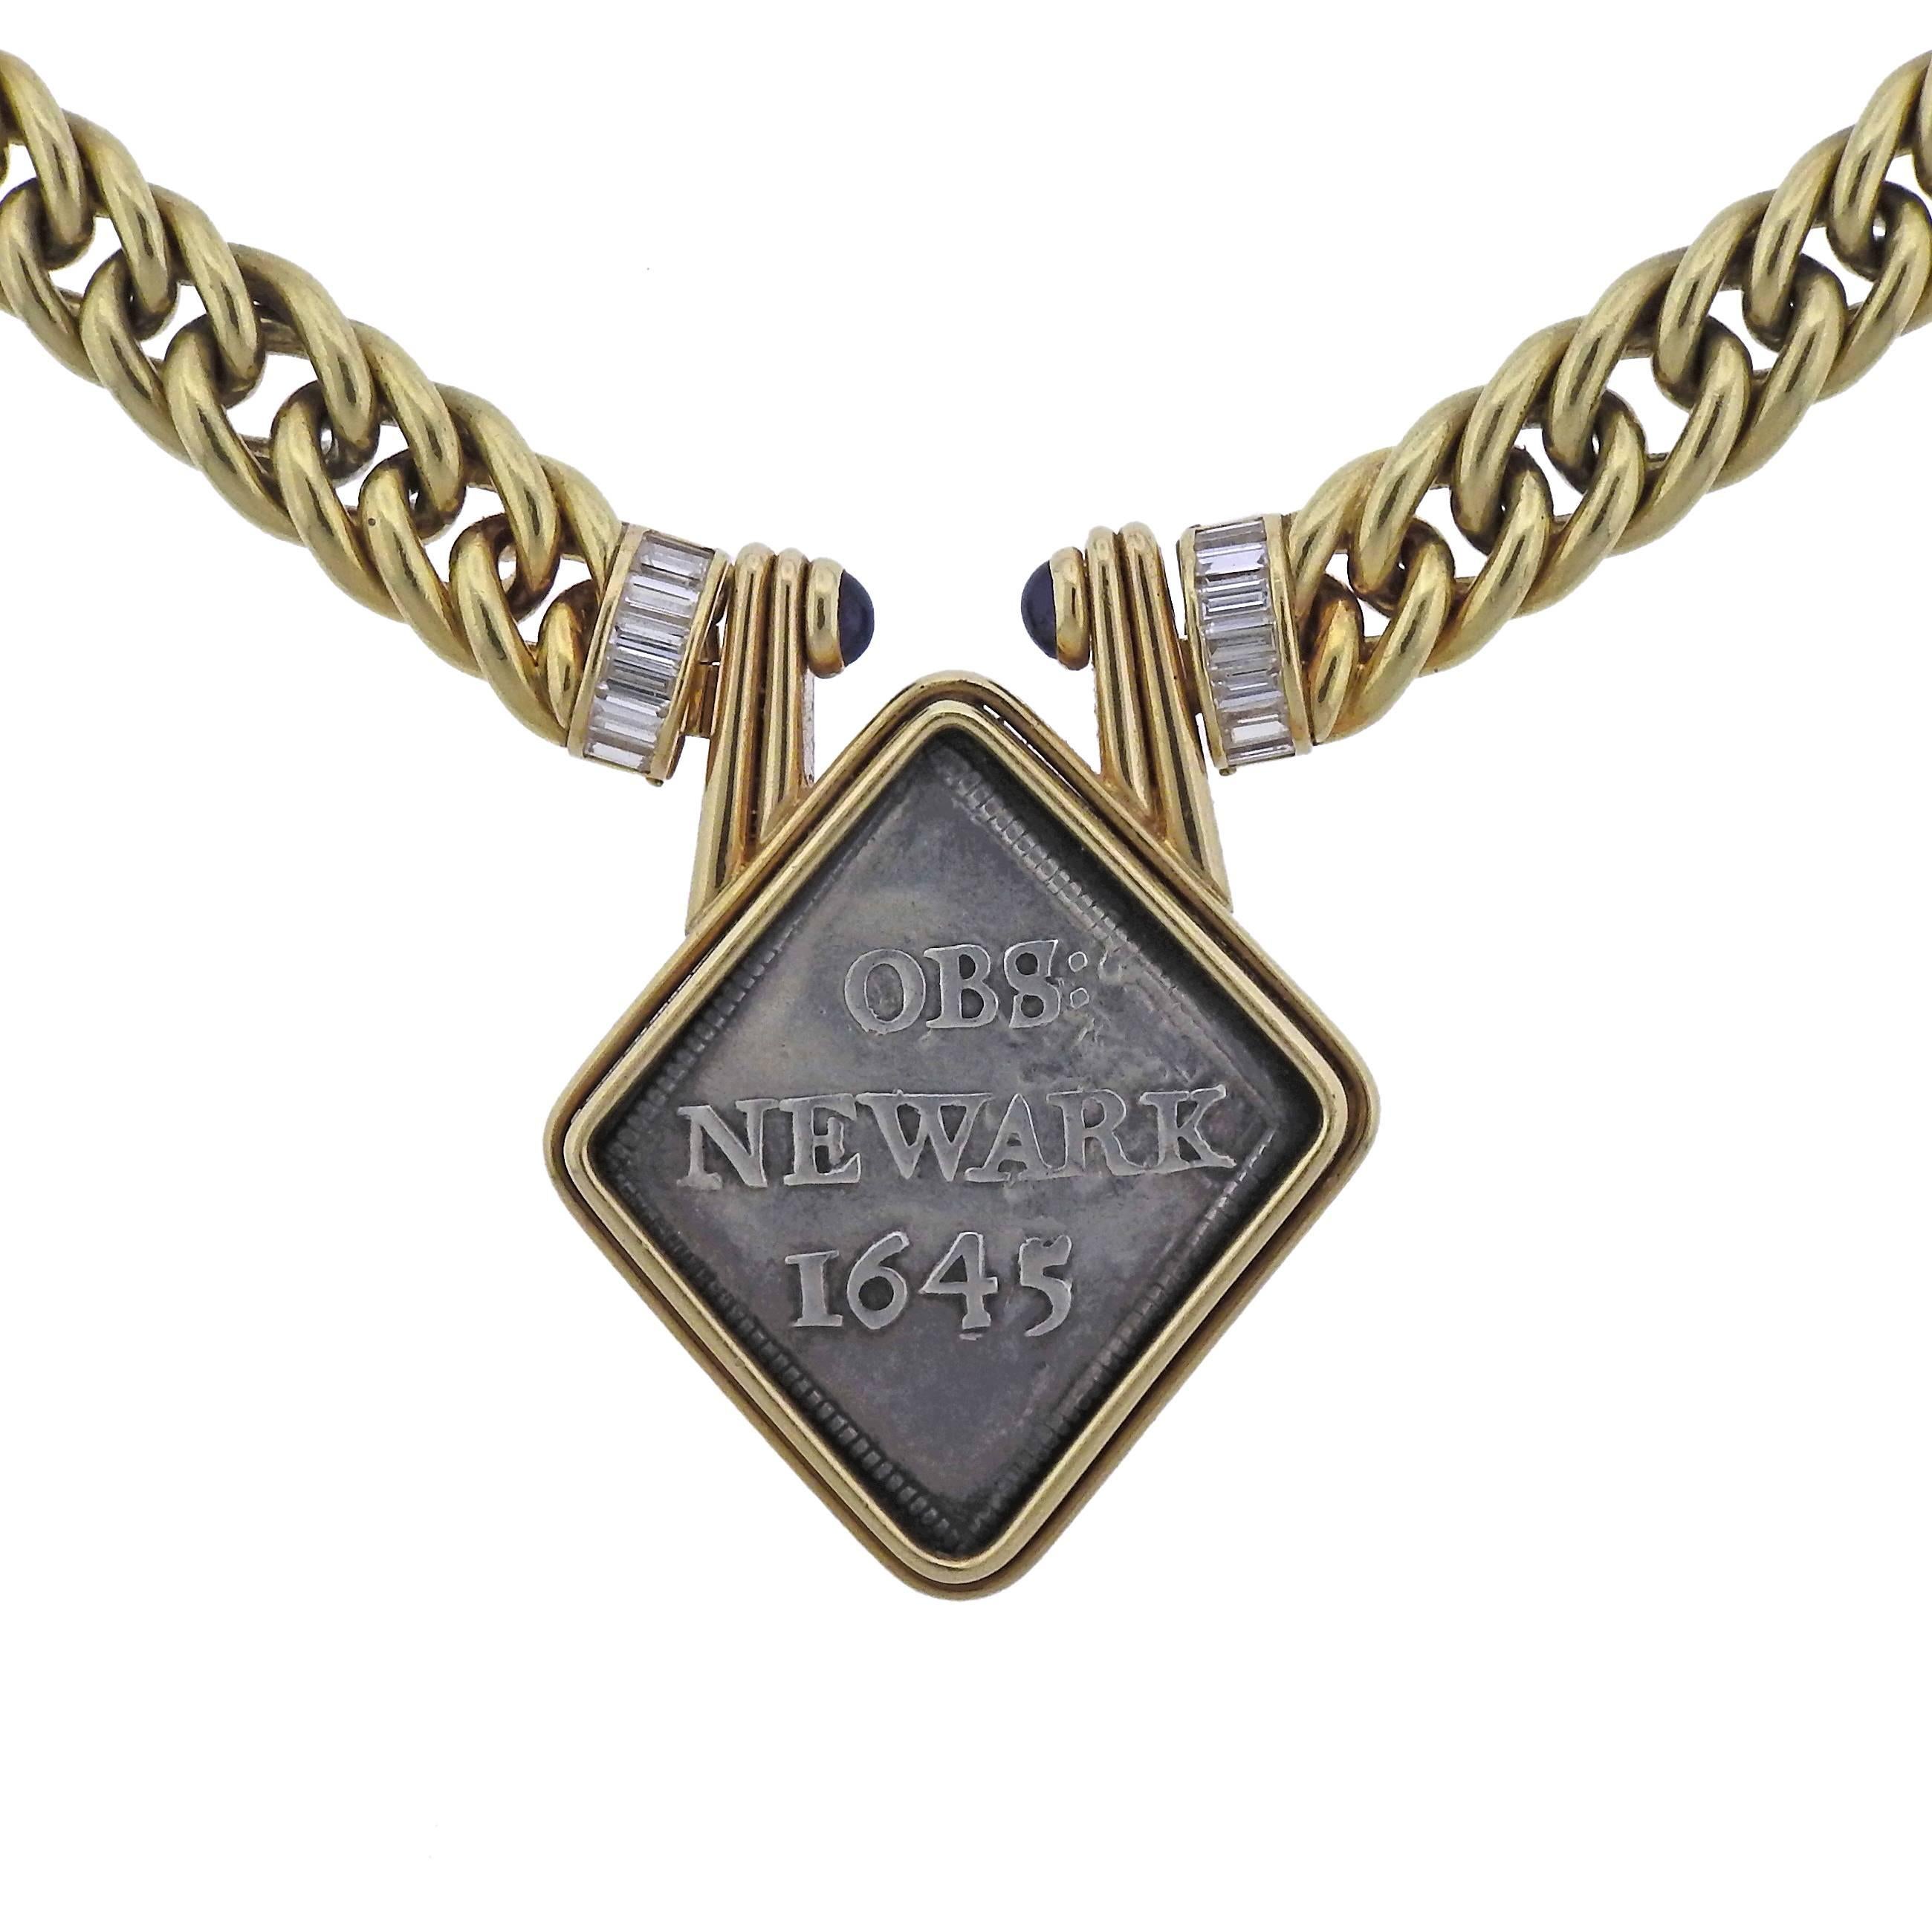 18k gold chain necklace, crafted by Bulgari, set with an OBS: Newark 1645 coin, with sapphire cabochons and approx. 0.60ctw in diamonds. Necklace is 14 3/4